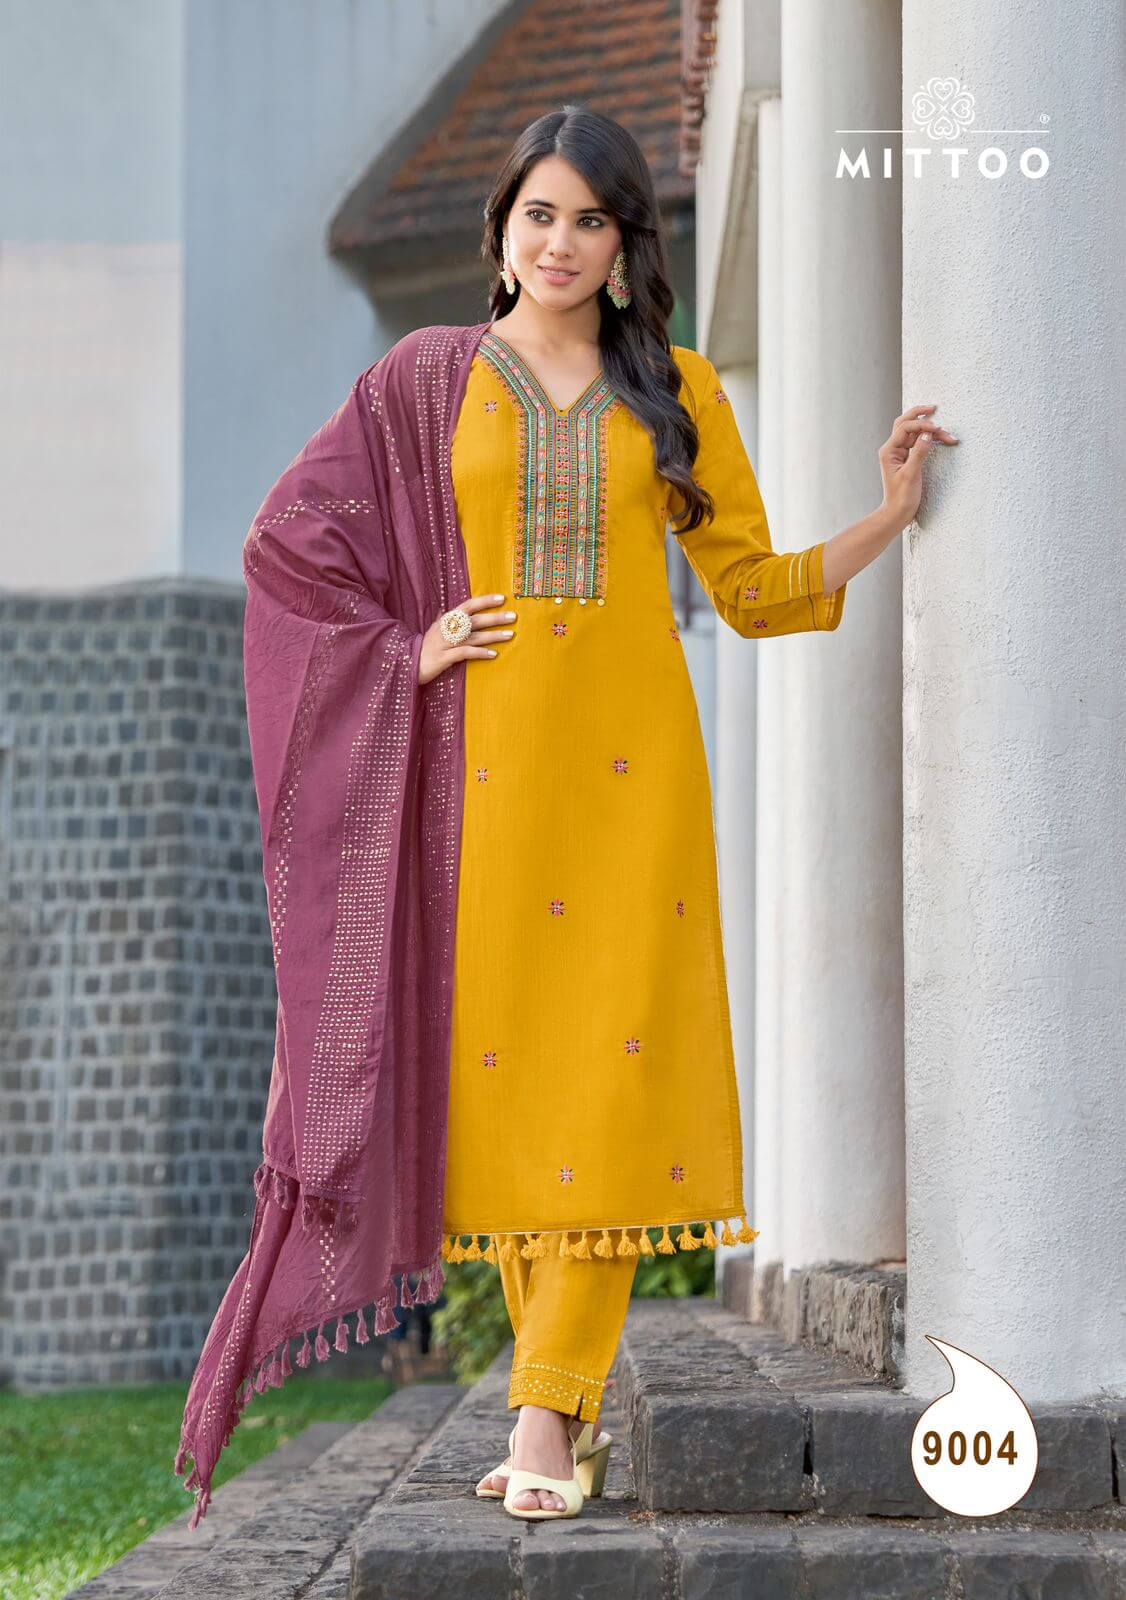 Mittoo Mosam Embroidery Salwar Kameez Catalog collection 4